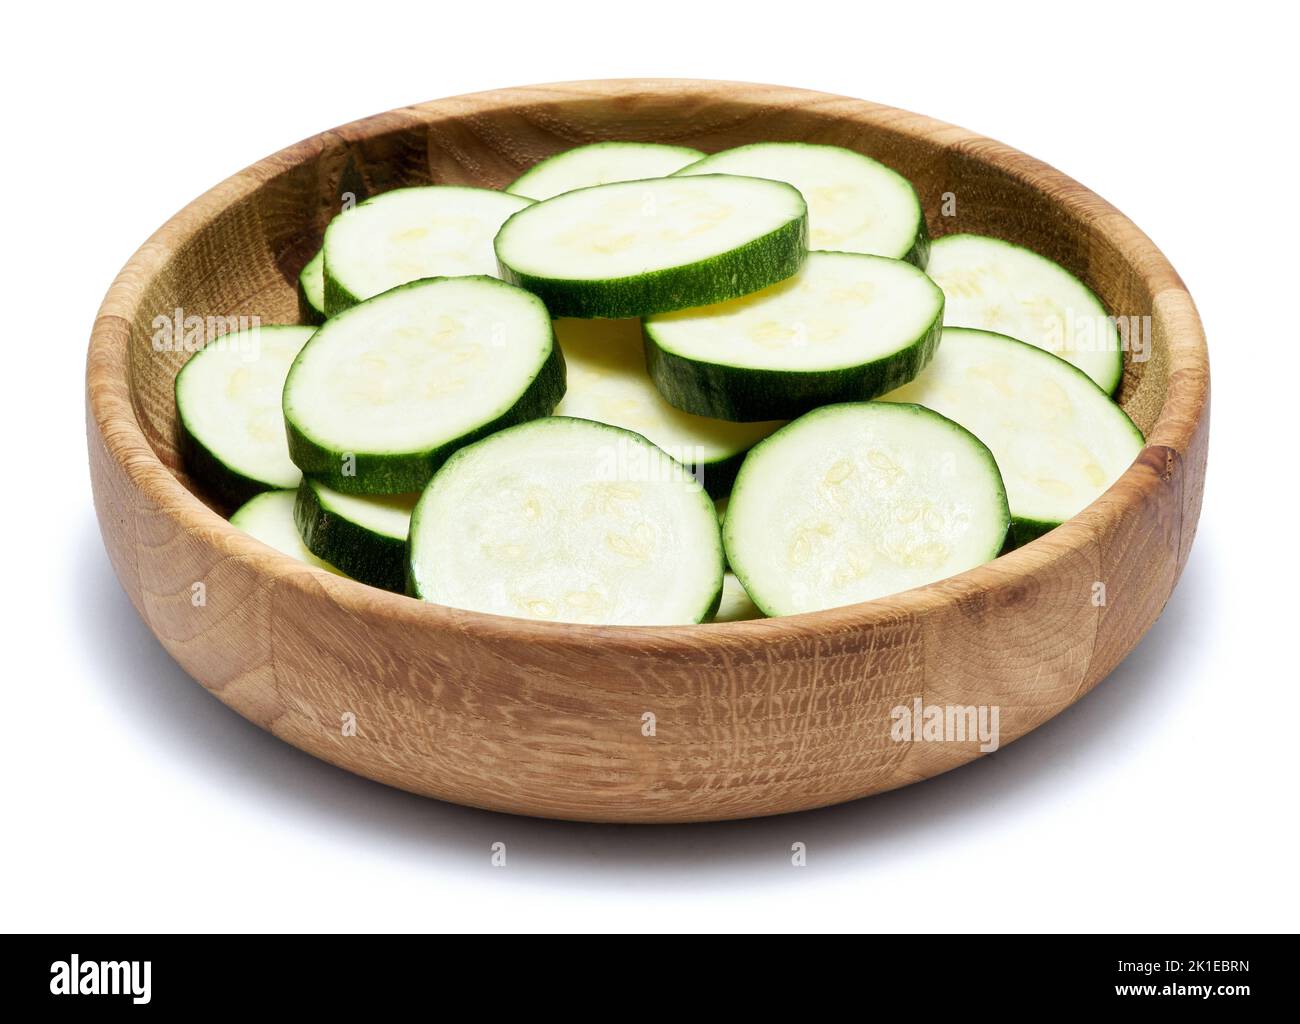 Sliced zucchini circles in wooden bowl isolated on white background Stock Photo